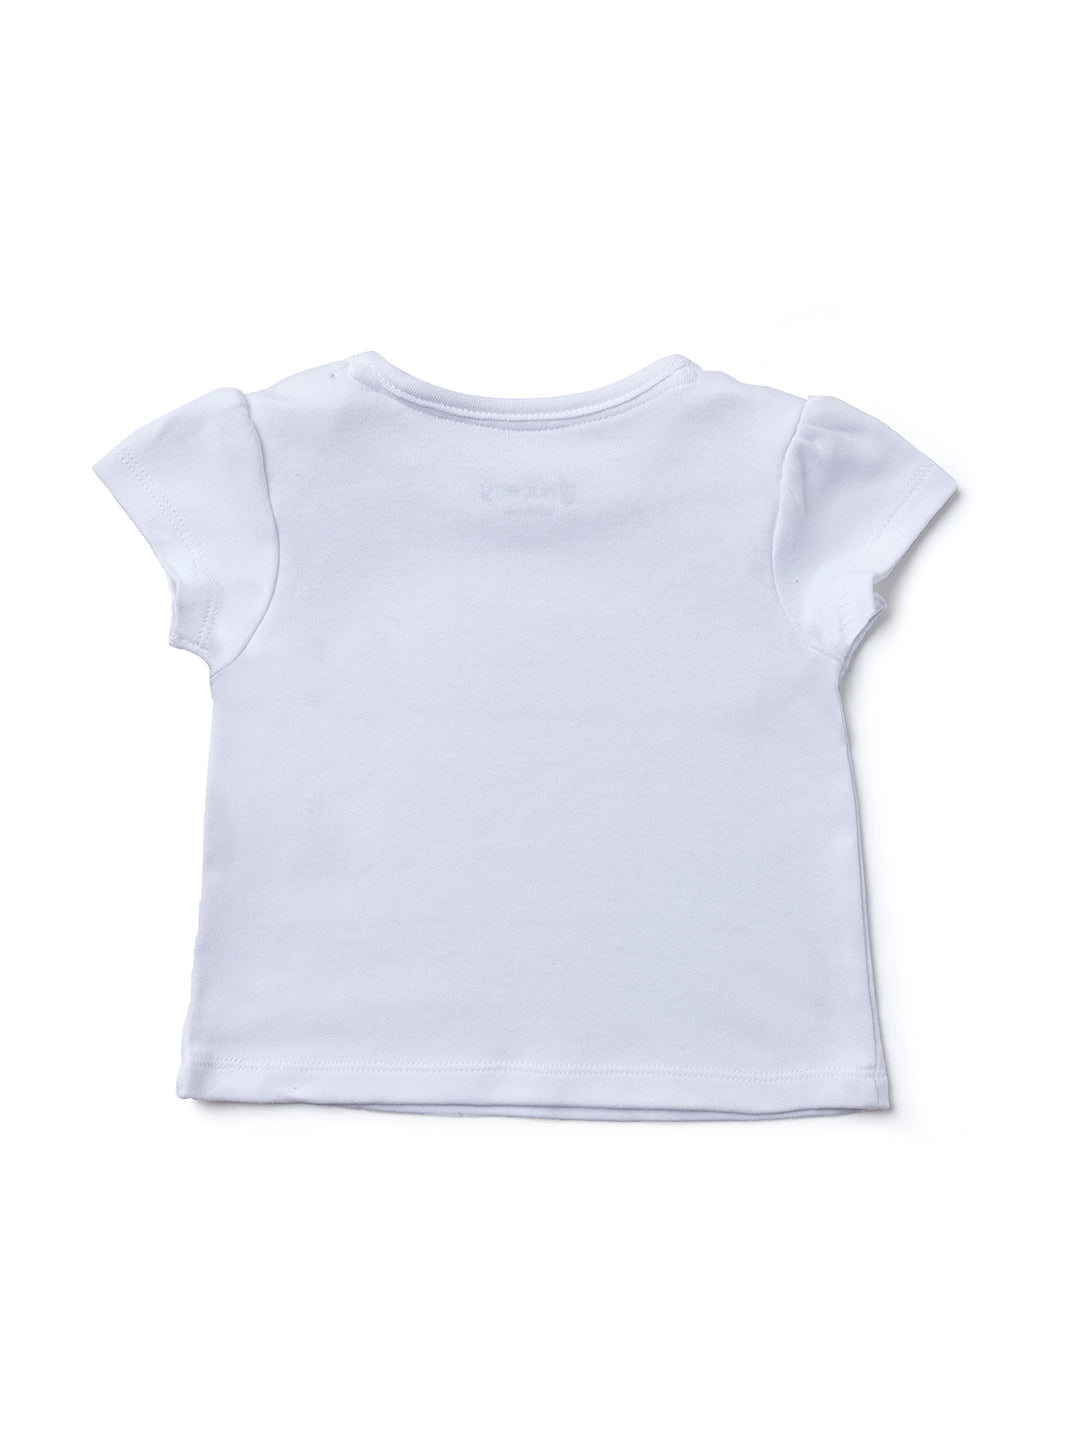 Nuberry New Born Cotton Girl T-Shirt Set of 2 Pcs | Top | Navy and White | Stylish & Comfortable T-Shirt